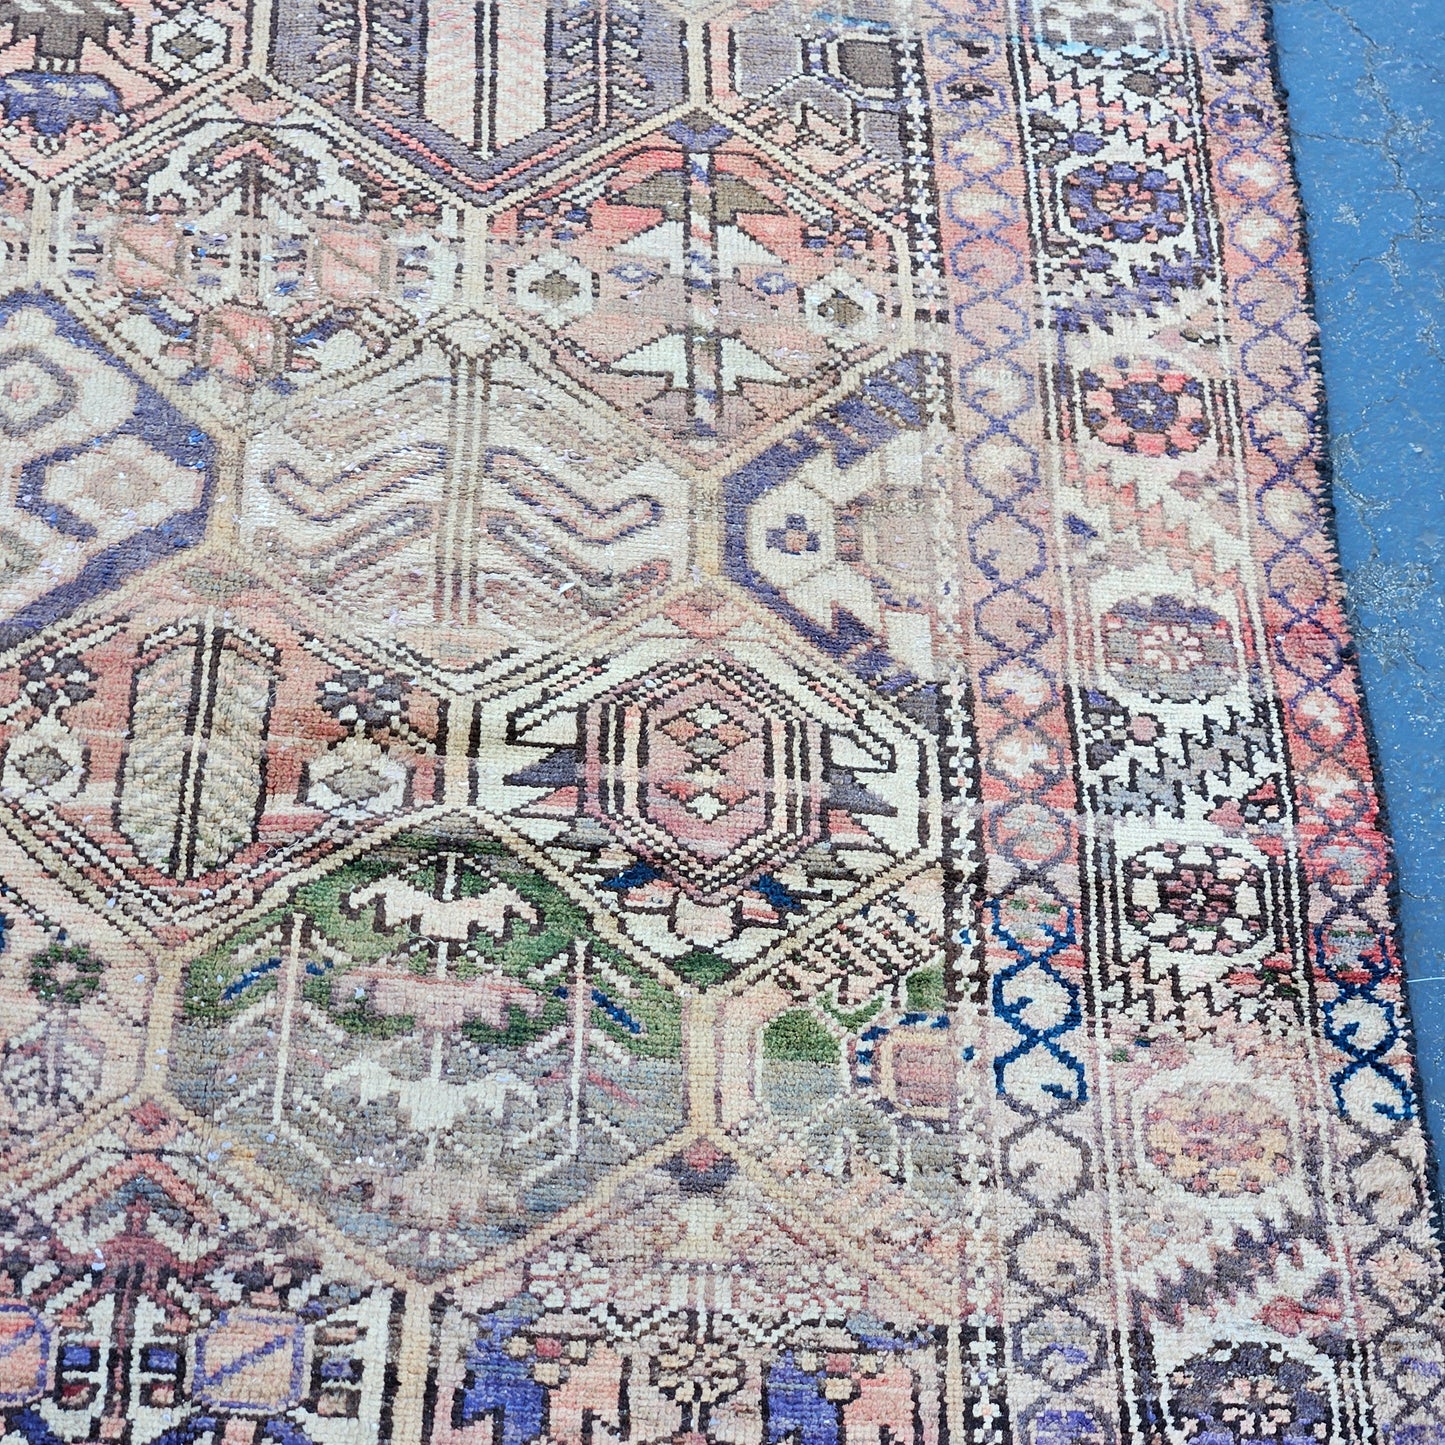 Antique 100% Wool Hand Knotted Brown Rug / Carpet - 4' 8" x 9' 5"